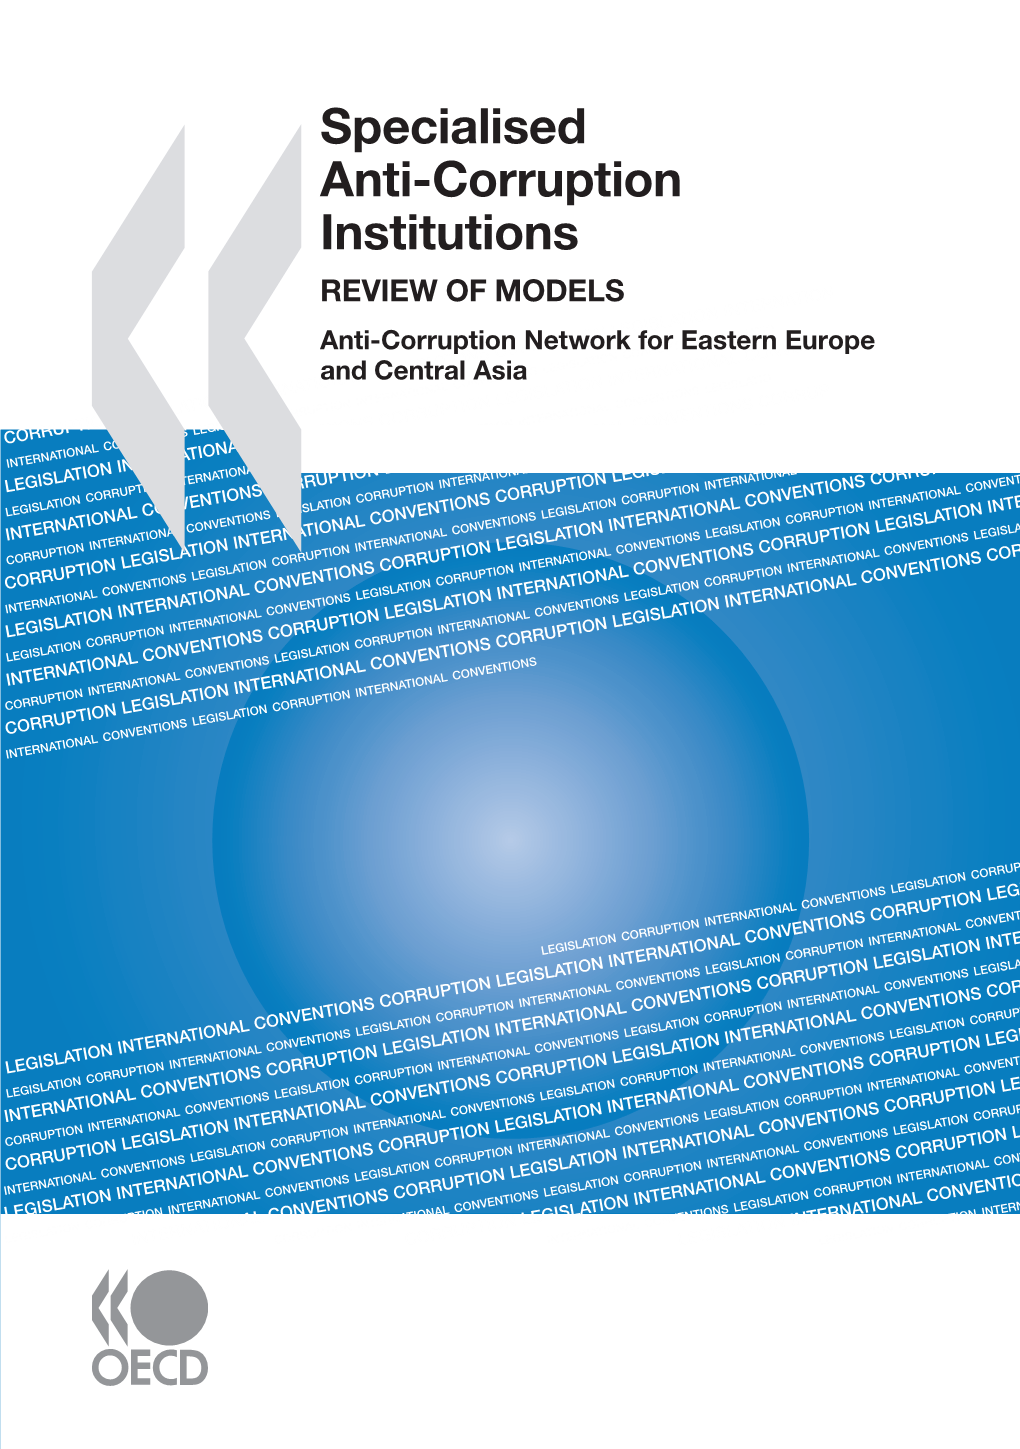 Specialised Anti-Corruption Institutions Specialised REVIEW of MODELS Anti-Corruption Anti-Corruption Network for Eastern Europe and Central Asia